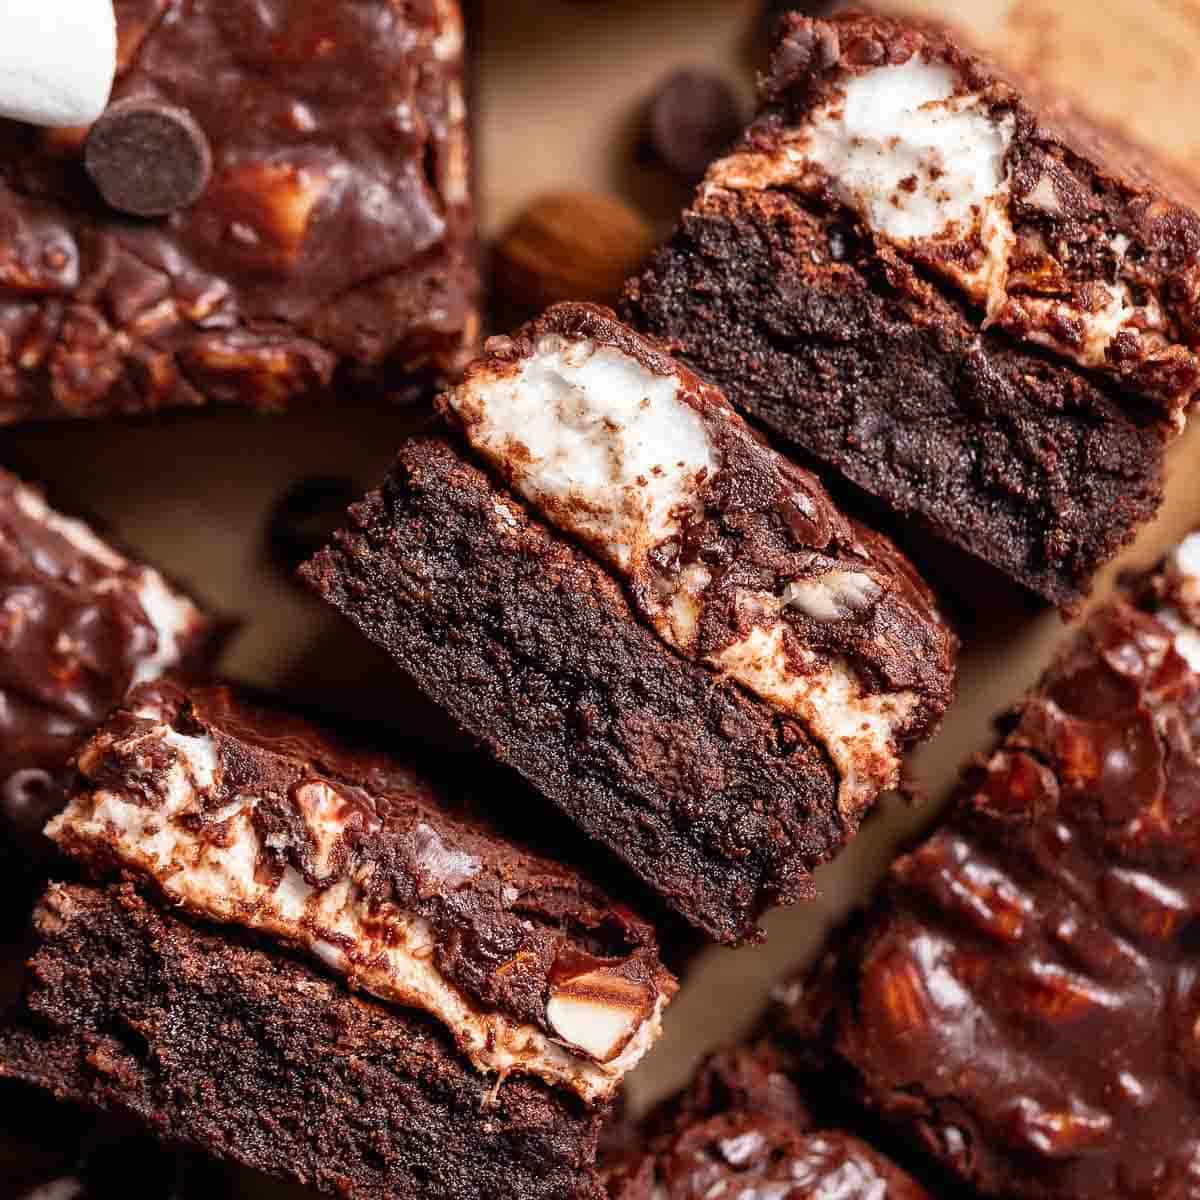 Rocky road brownies on their sides to show the fudgy texture and gooey marshmallow layer.